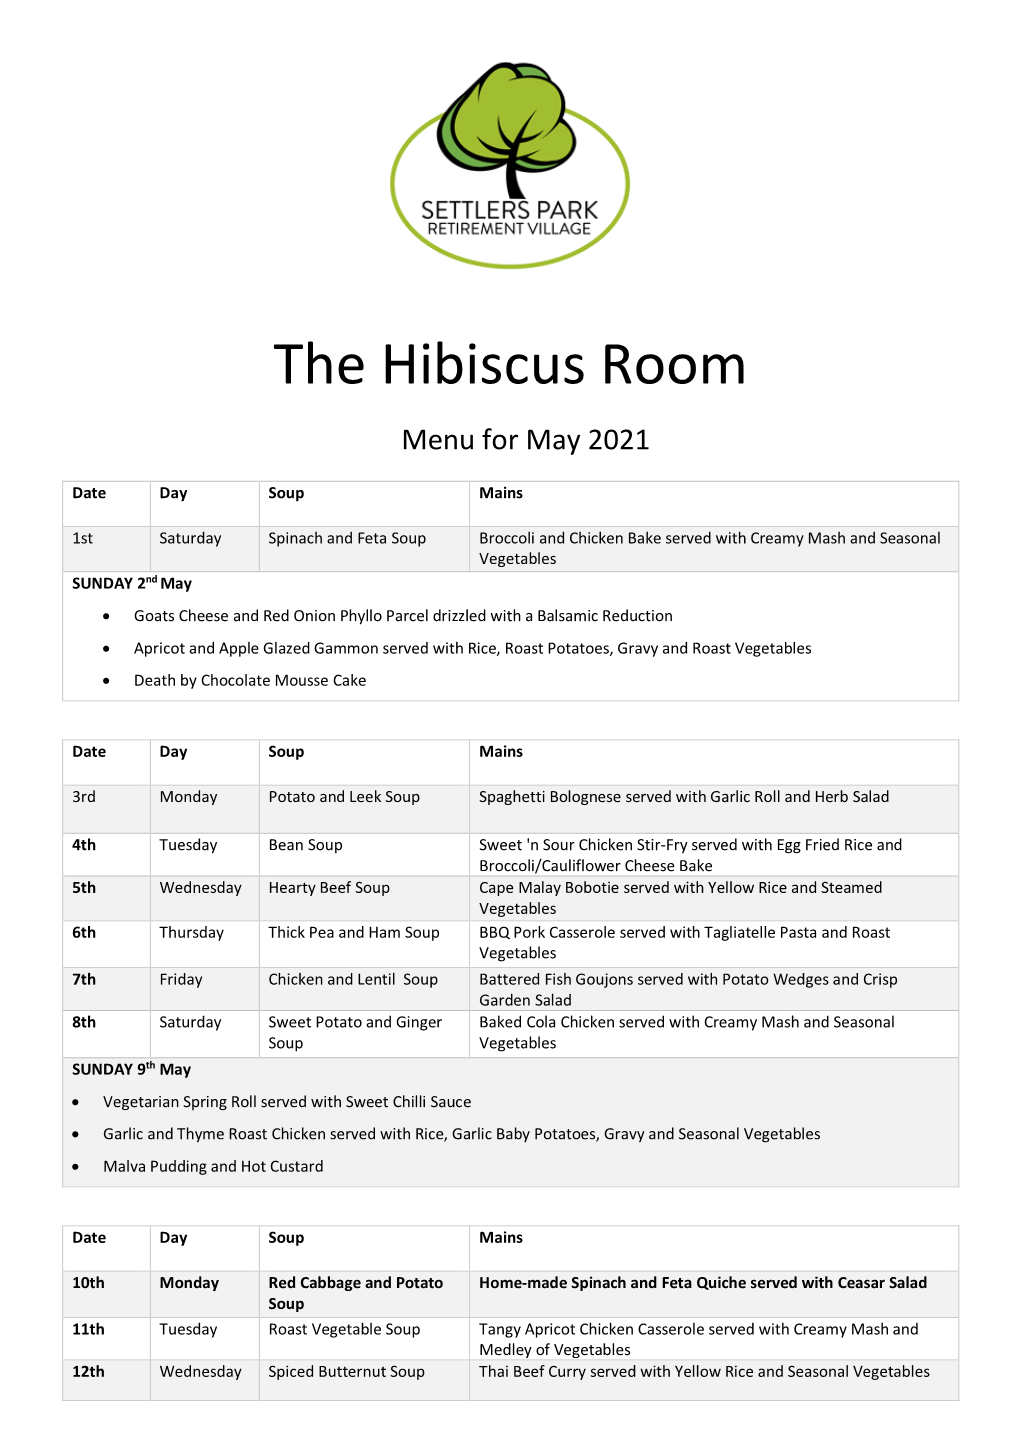 The Hibiscus Room Menu for May 2021